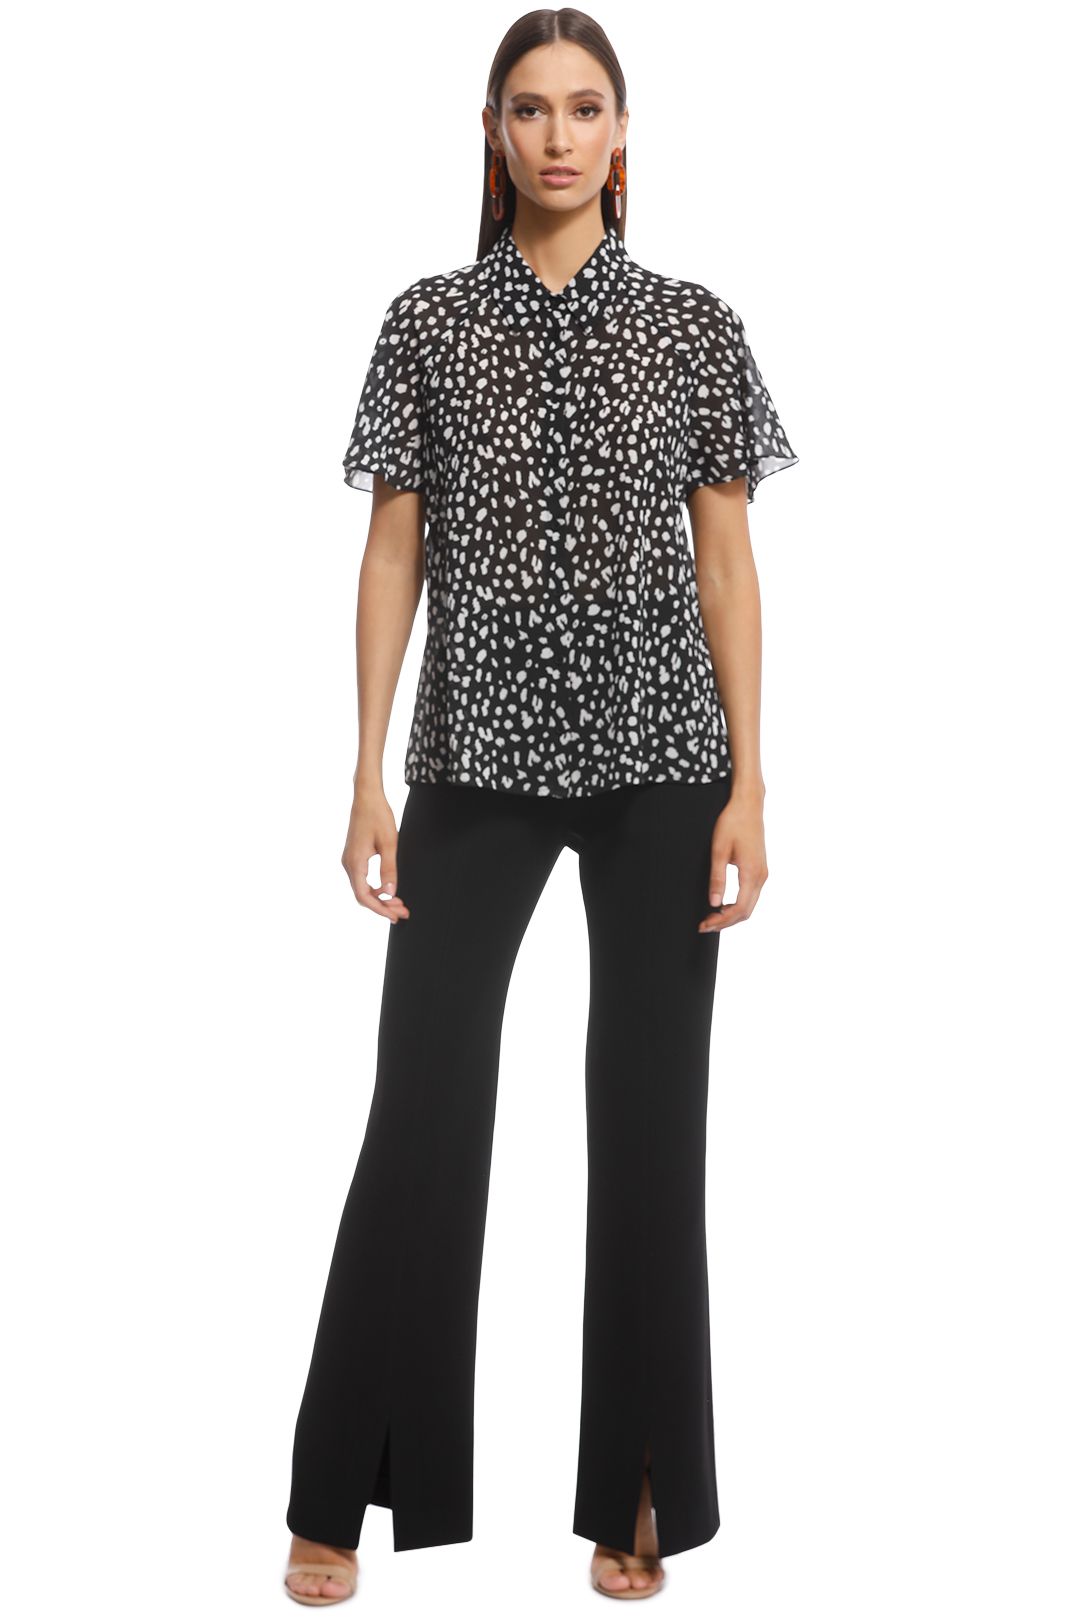 Cue - Animal Georgette Flared Sleeve Shirt - Black and White - Front